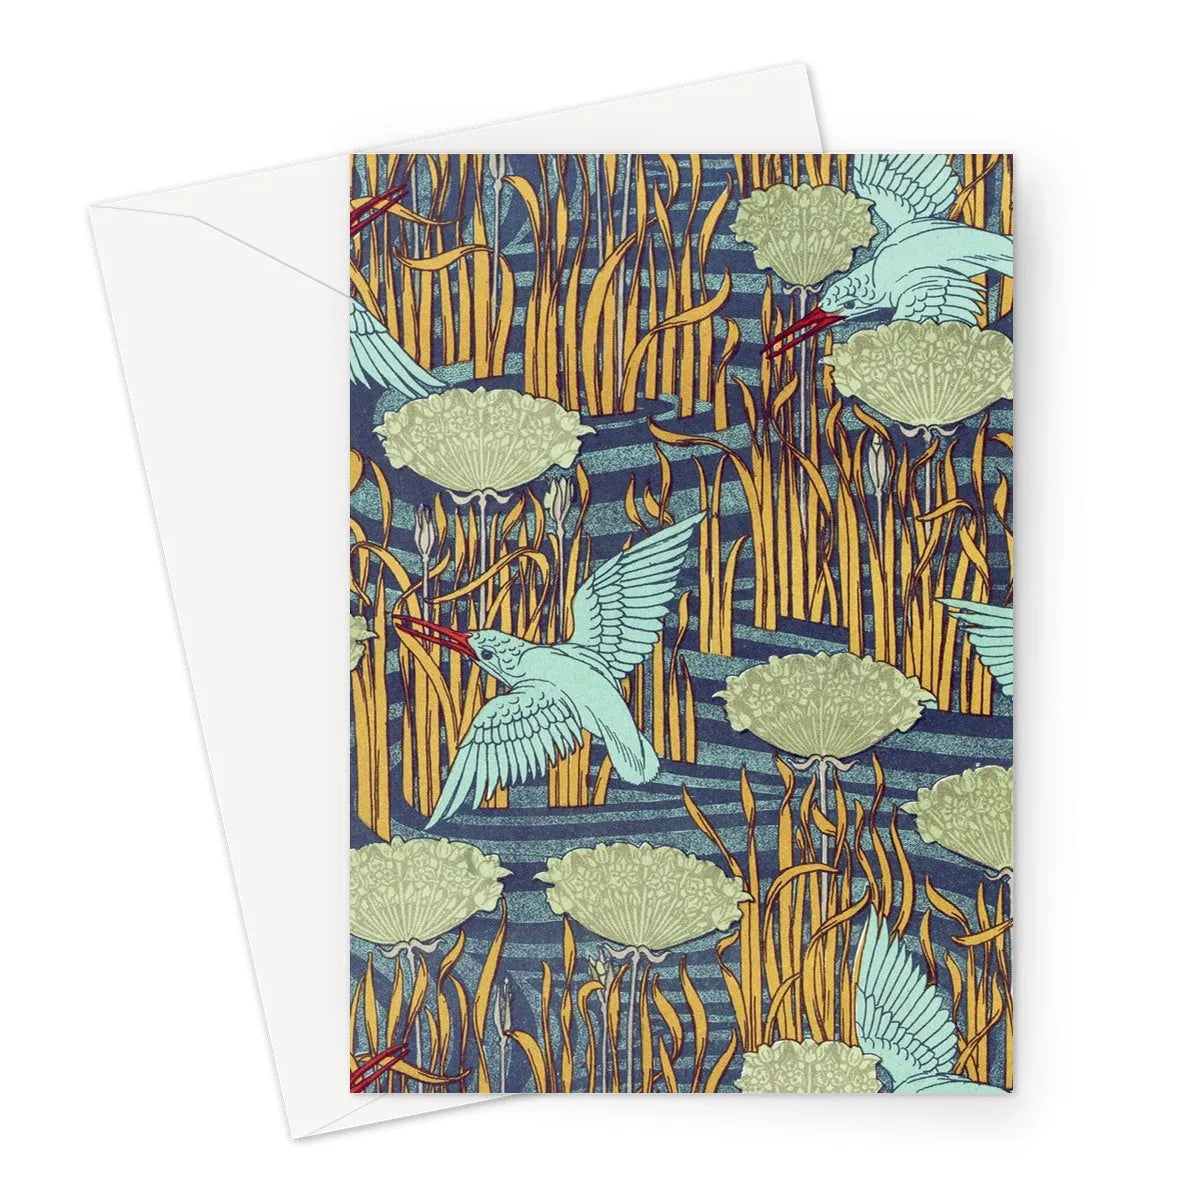 Martins-pêcheurs By Maurice Pillard Verneuil Greeting Card - A5 Portrait / 10 Cards - Greeting & Note Cards